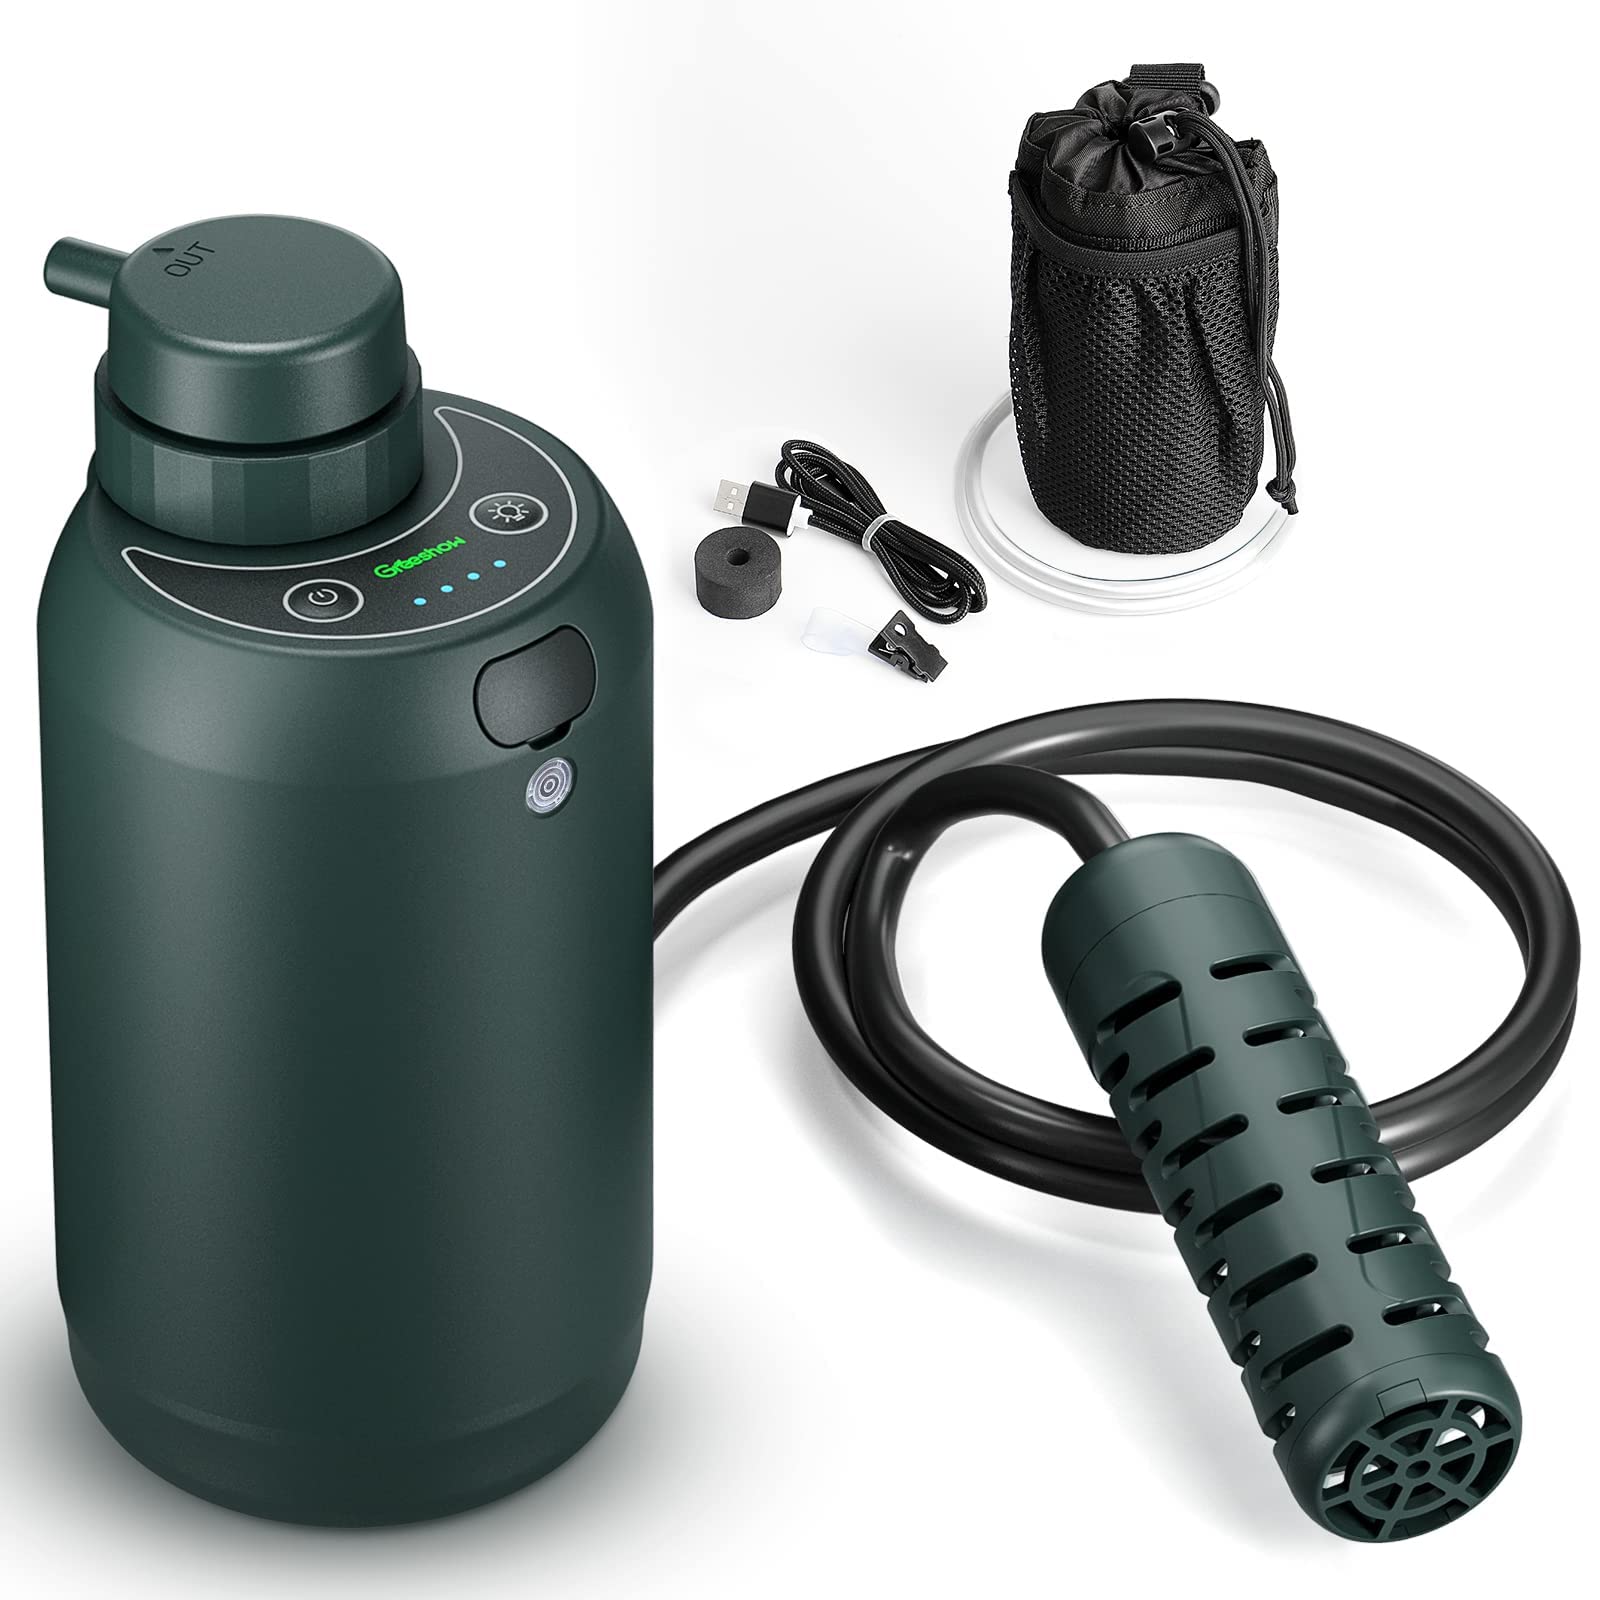 Portable Water Filter Greeshow Electric Water Purifier Survival